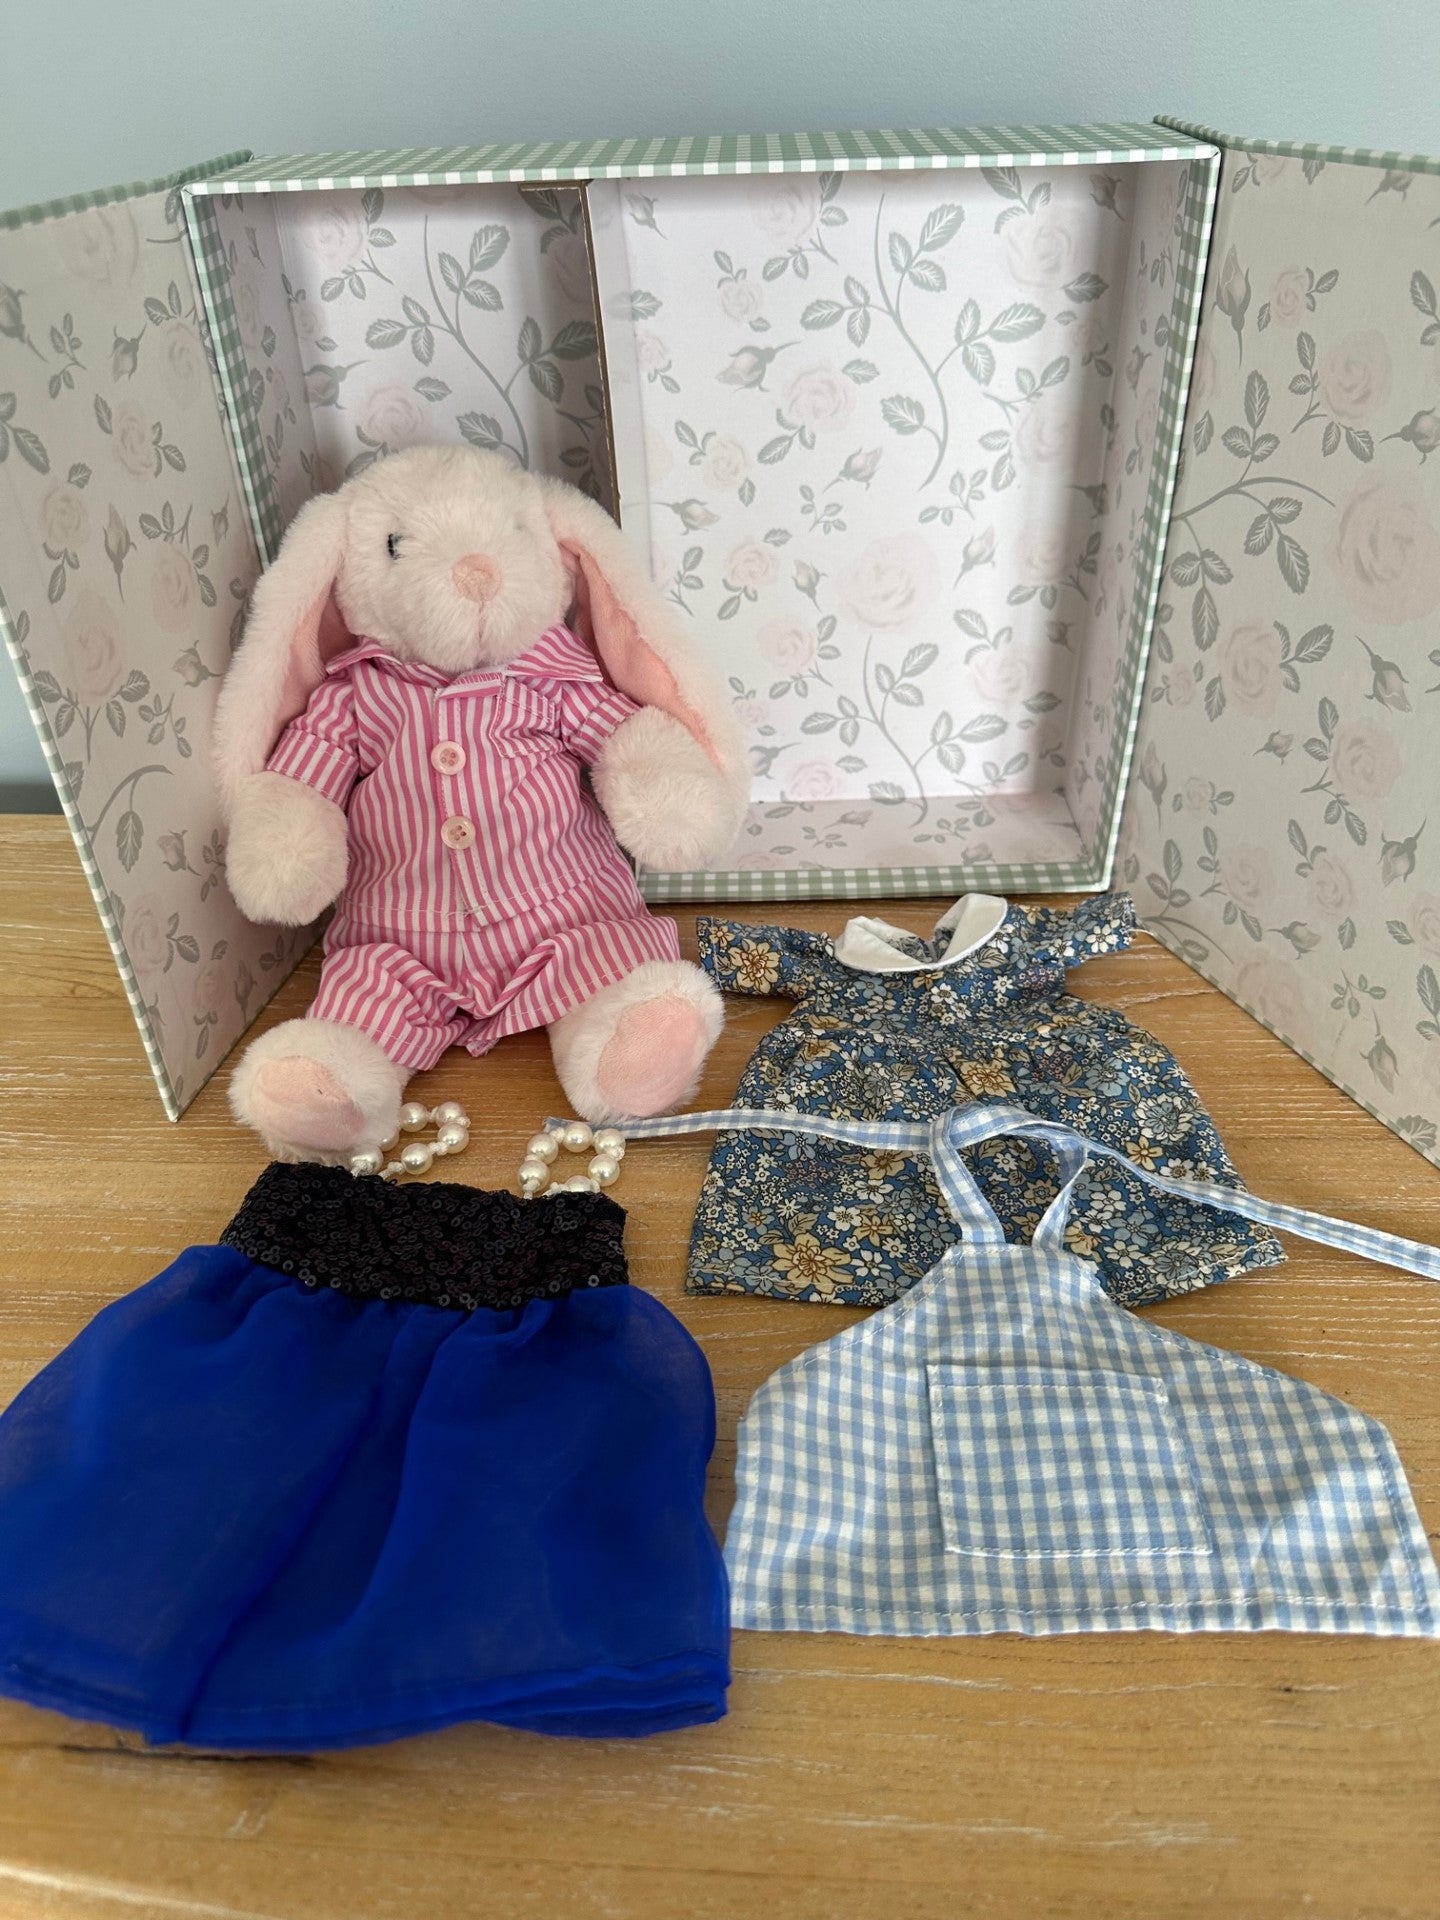 Marmalade soft toy Rabbit comes with her own wardrobe and in a heirloom box